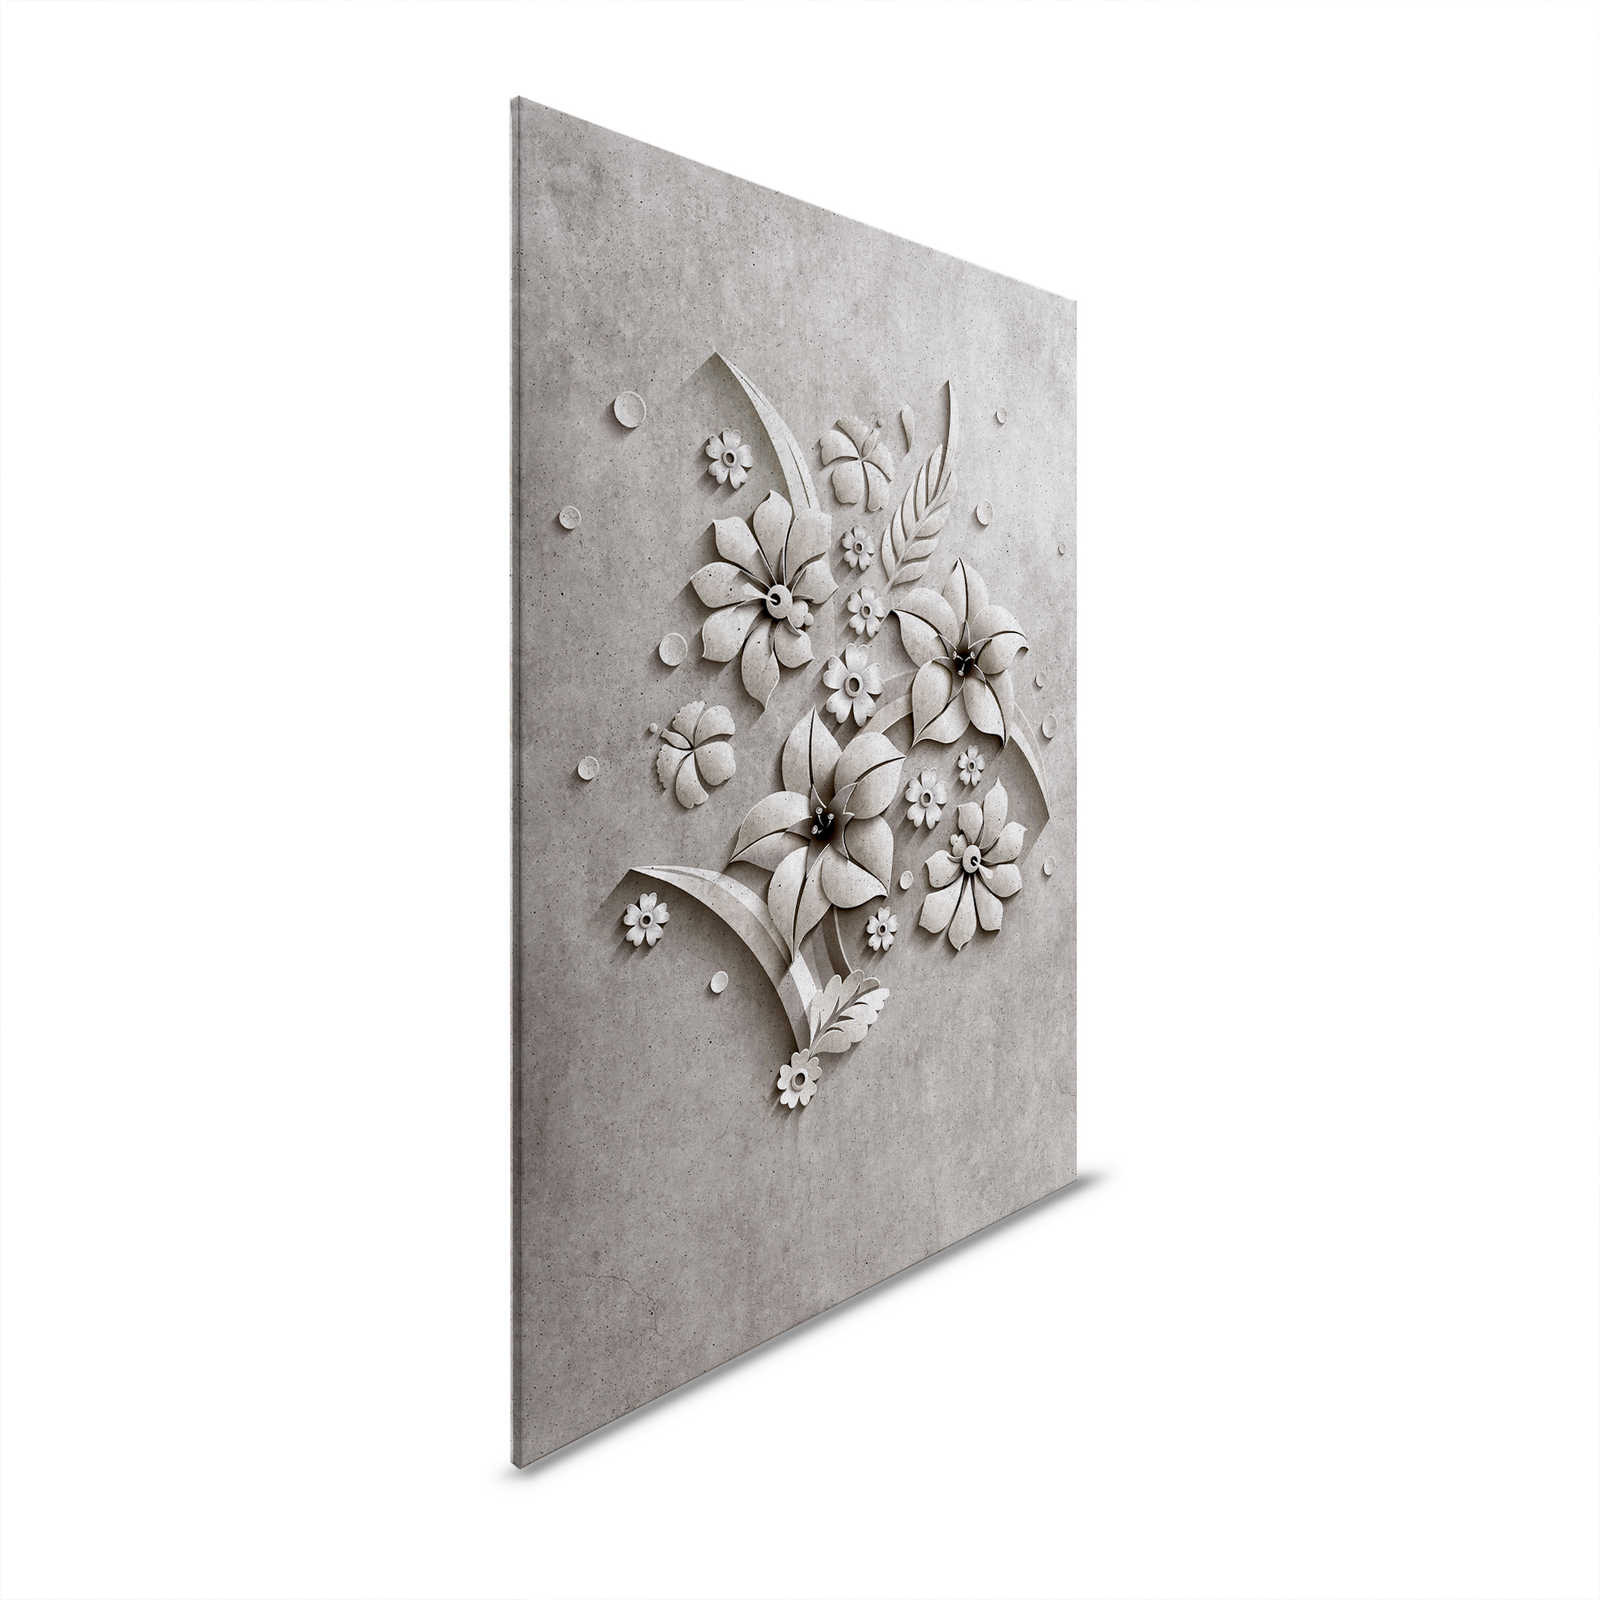 Relief 1 - Canvas painting in concrete structure of a flower relief - 0.90 m x 0.60 m
